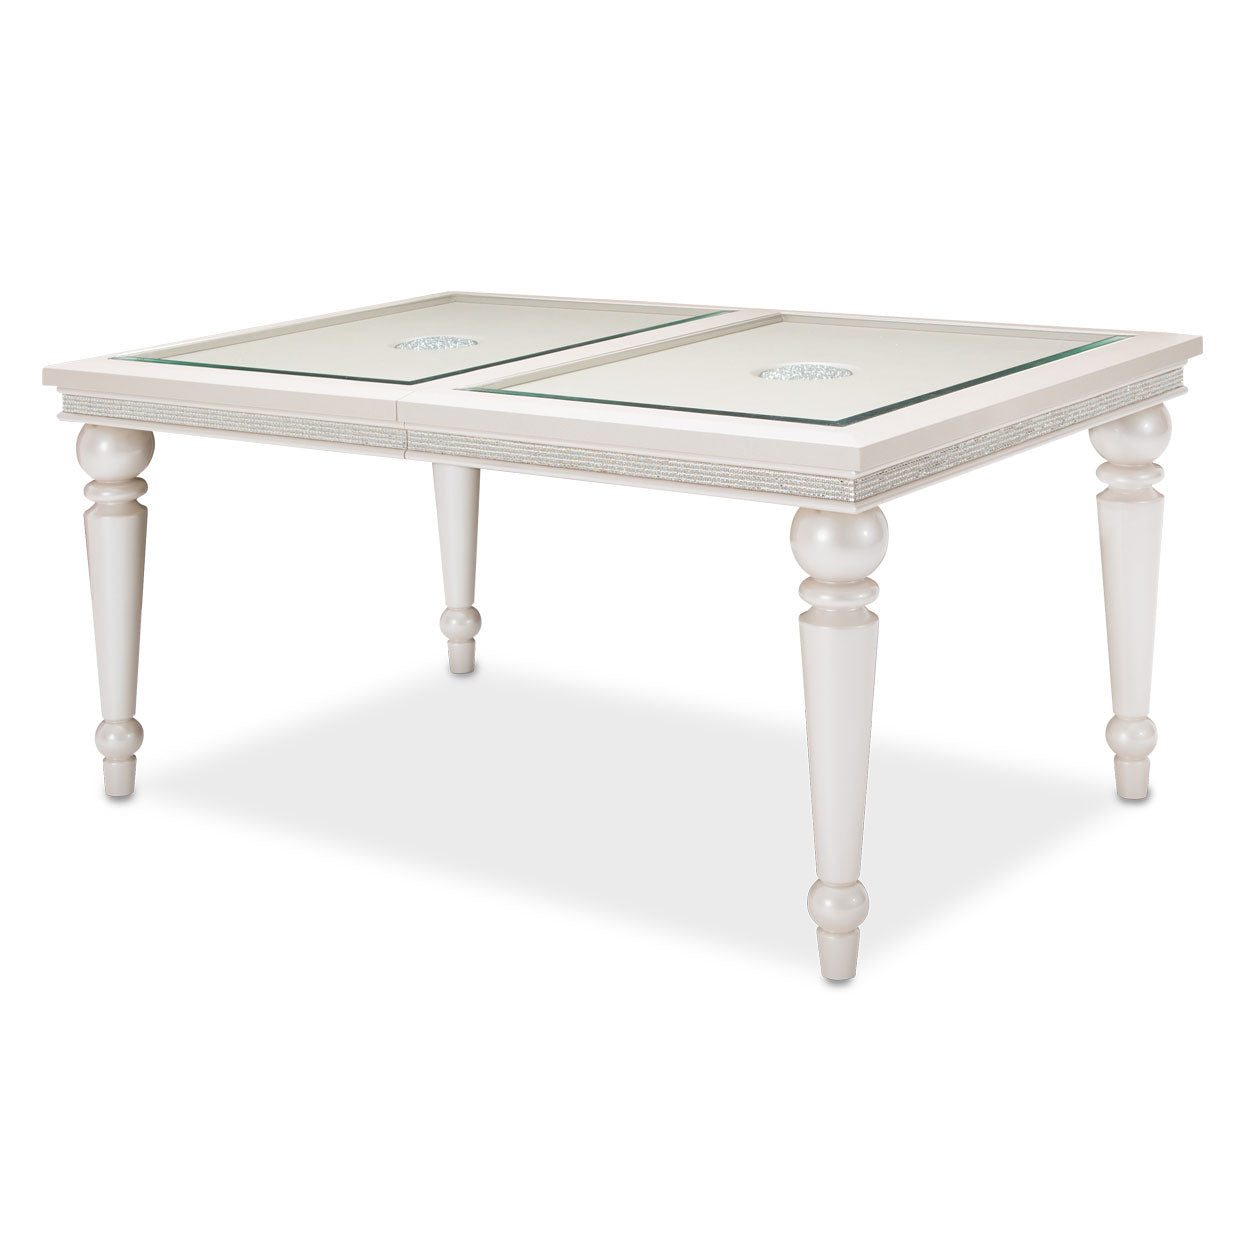 GLIMMERING HEIGHTS 4 Leg Dining Table - Dreamart Gallery